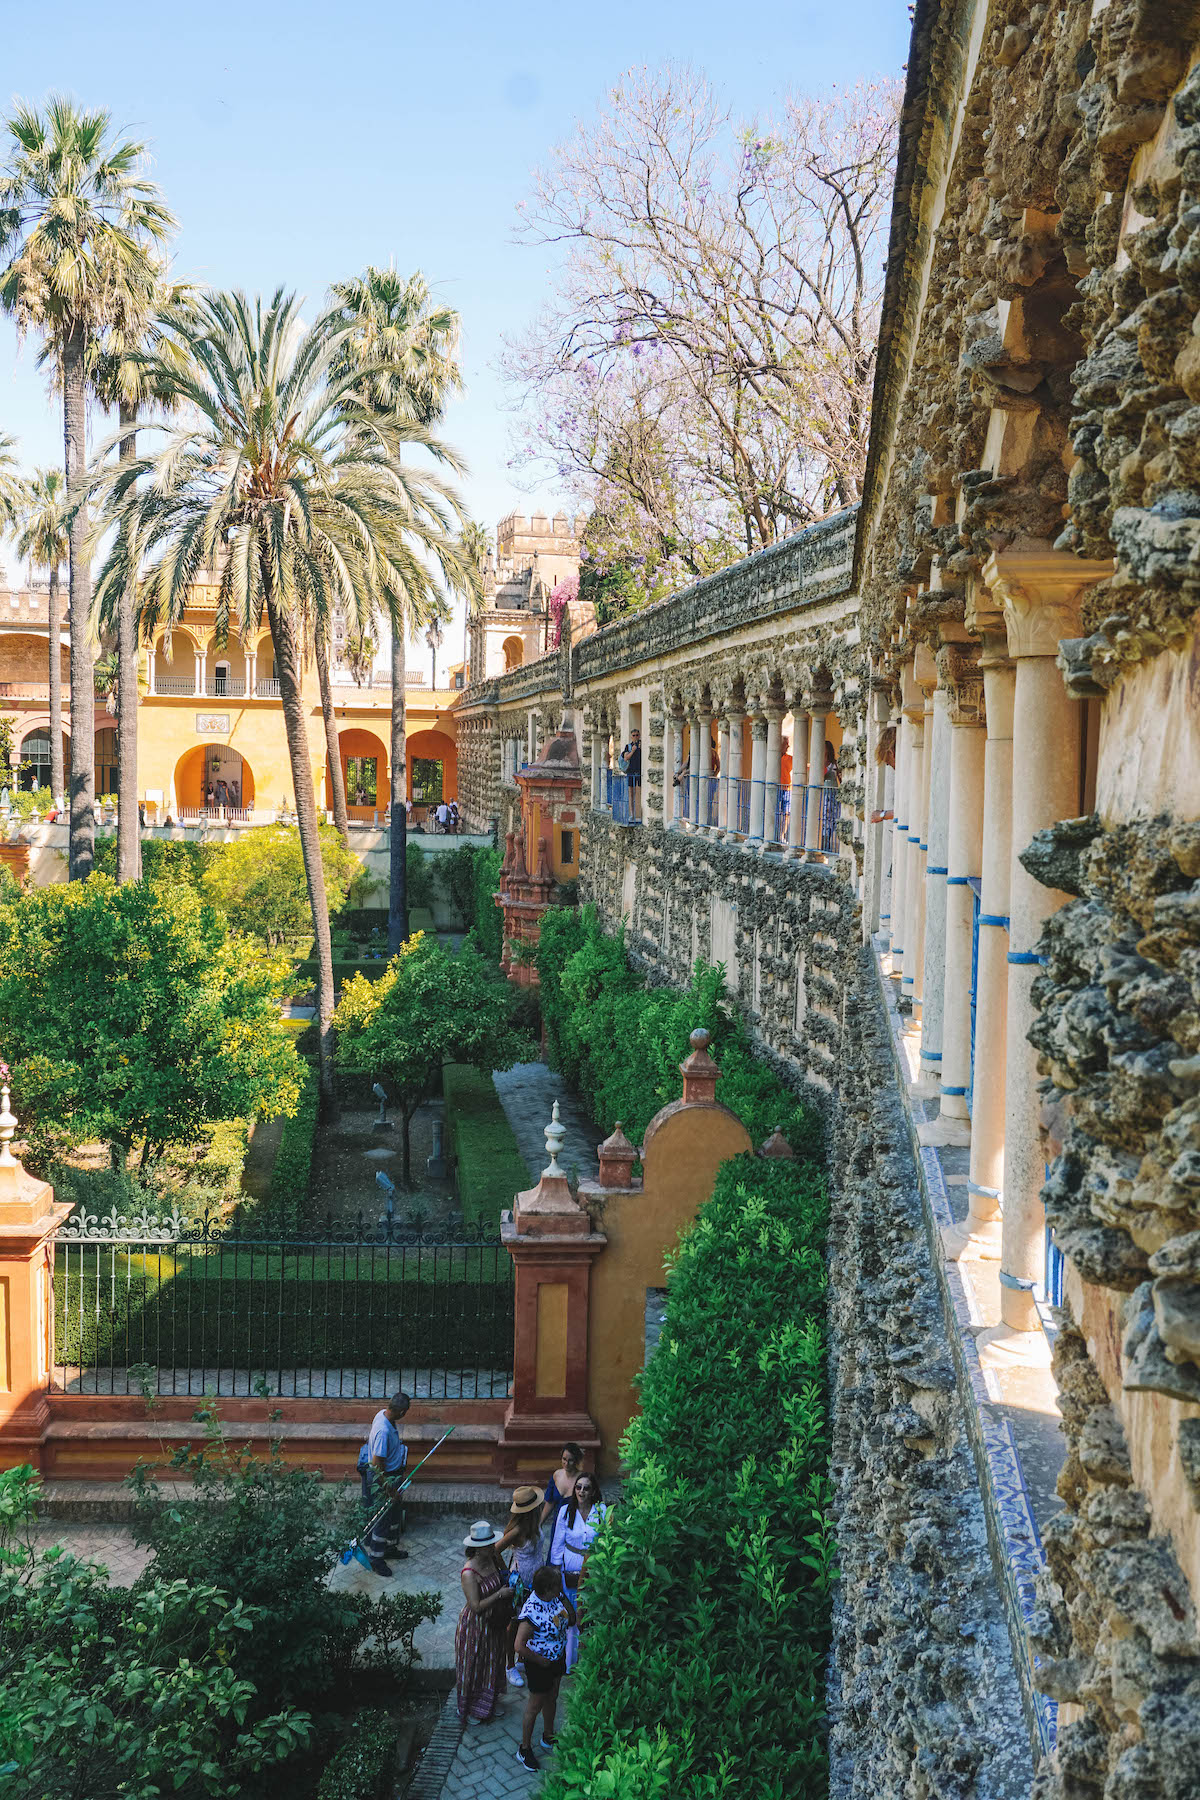 View from the Grotto Gallery in the Real Alcazar of Seville.